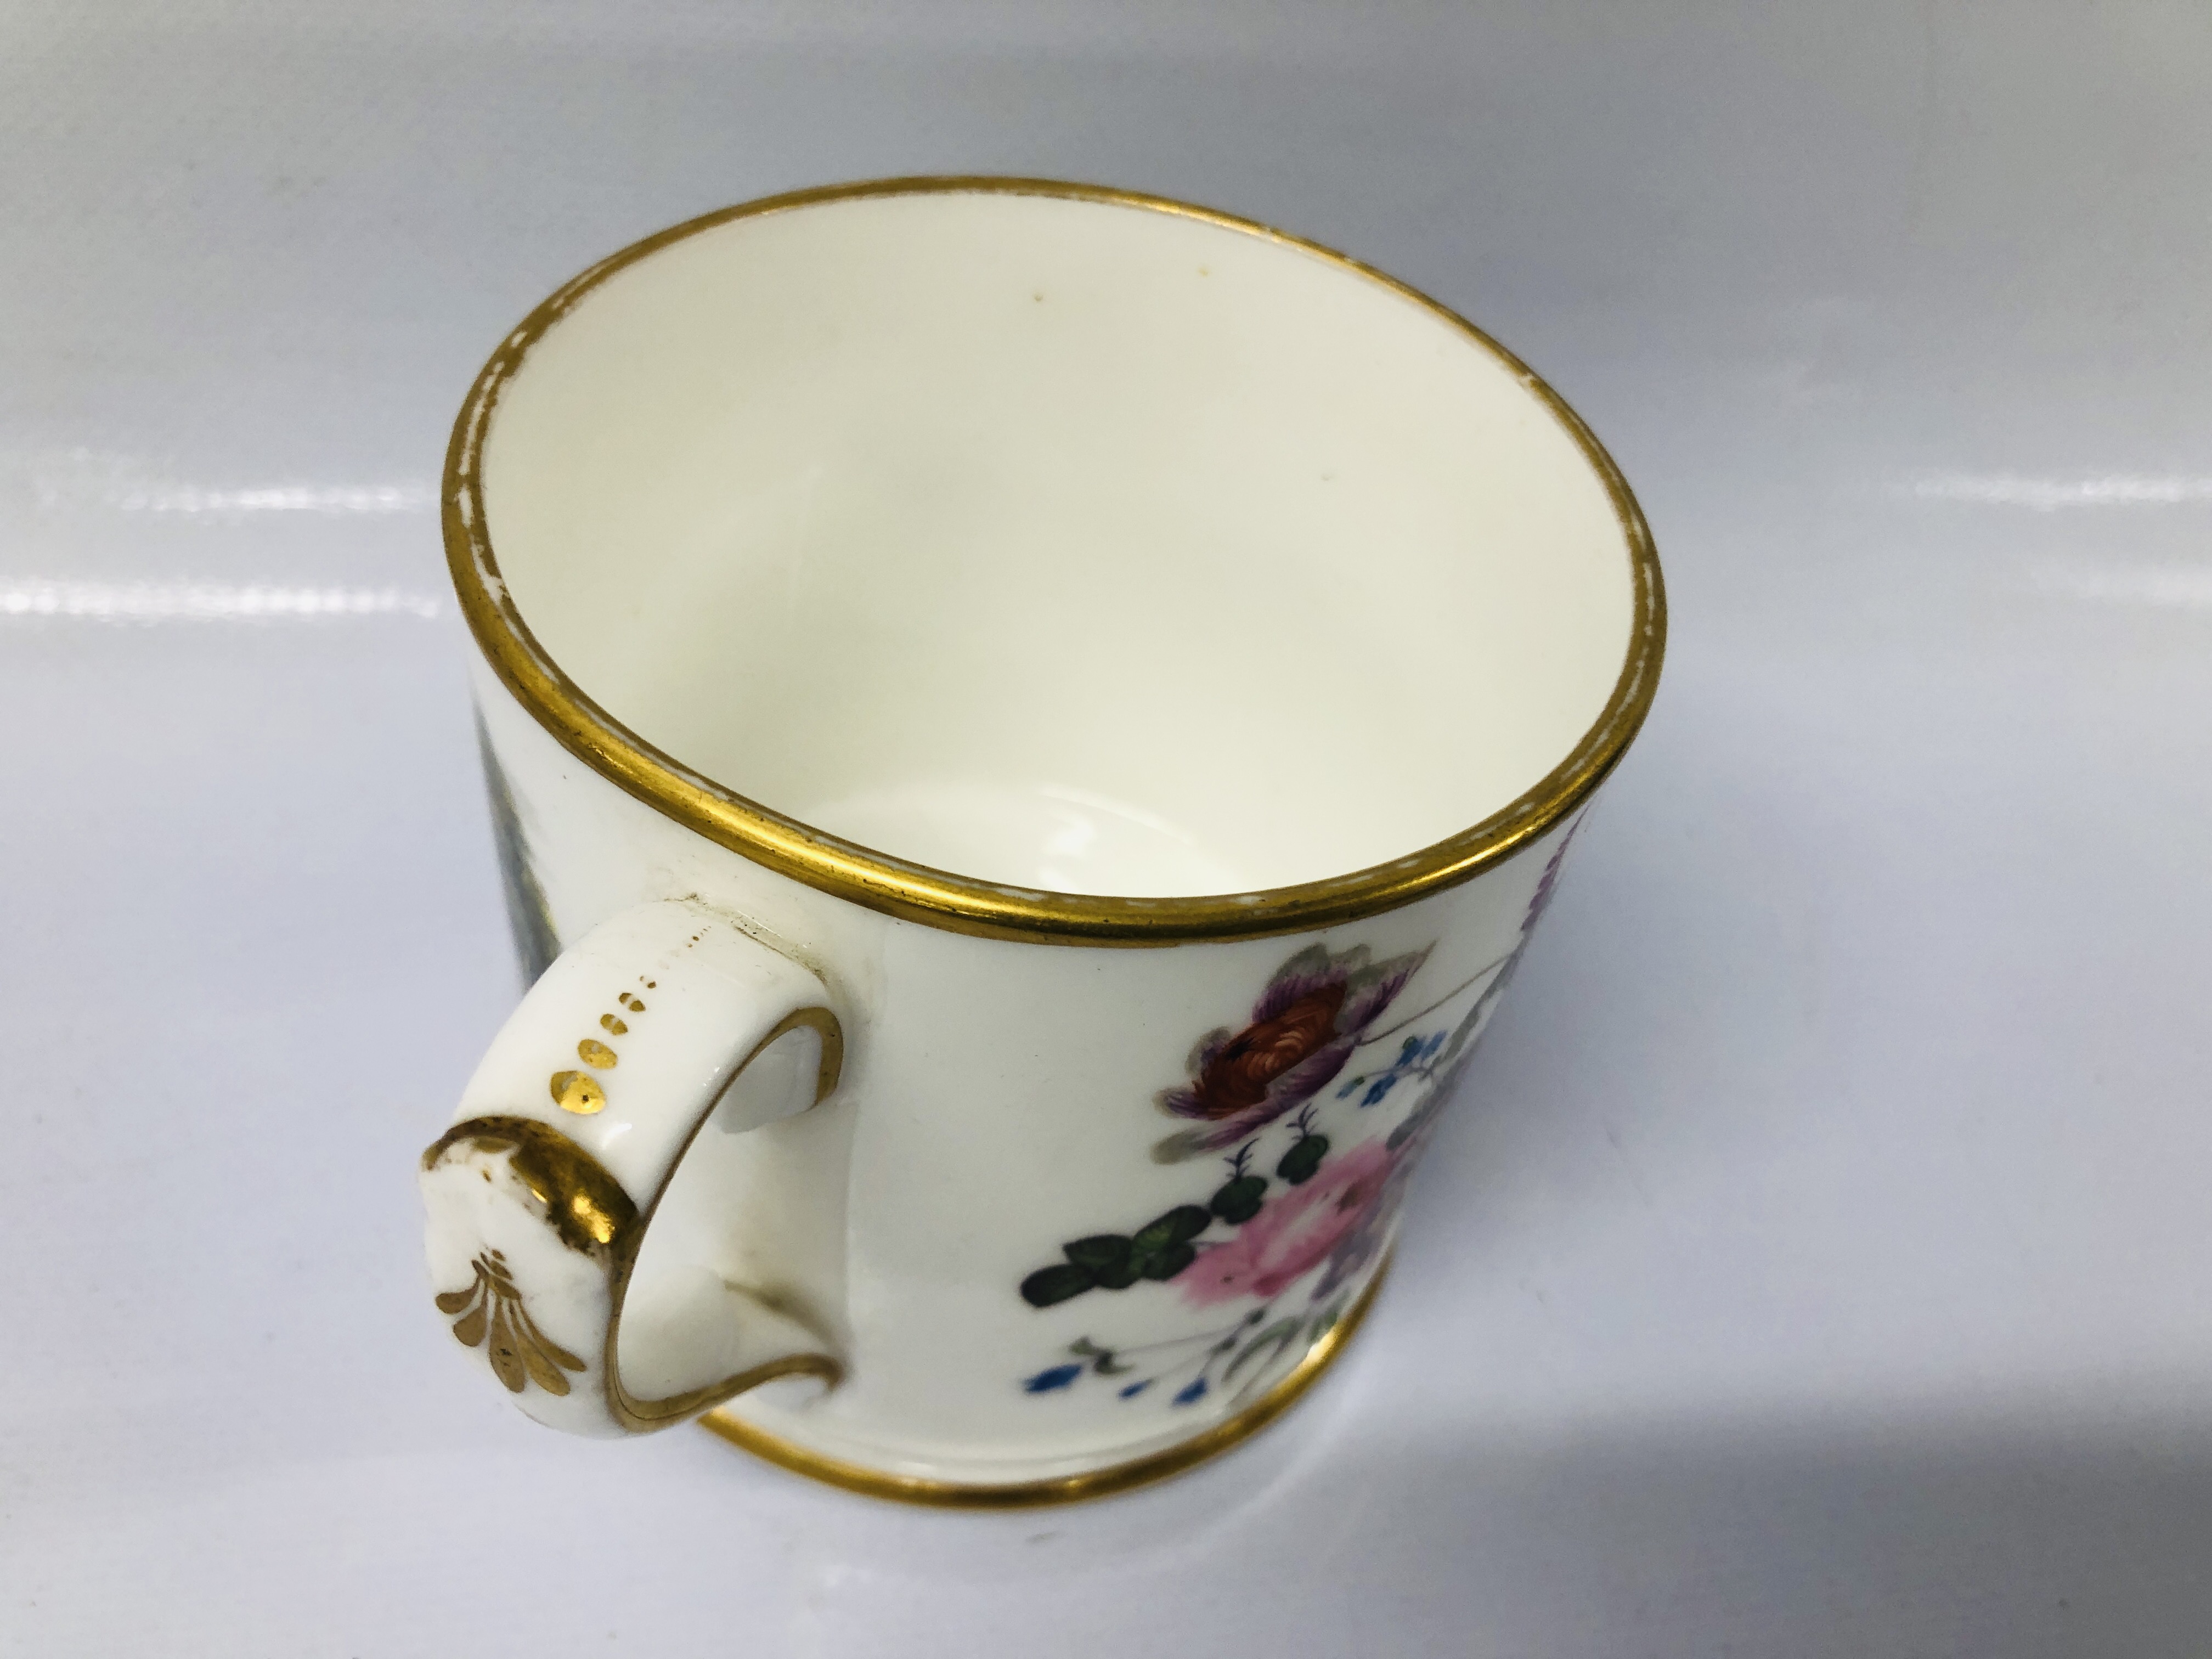 VINTAGE "DAVENPORT" MUG HANDPAINTED WITH FLOEWRS AND LAKE SCENE ALONG WITH A CREAM WARE CHRISTENING - Image 5 of 9